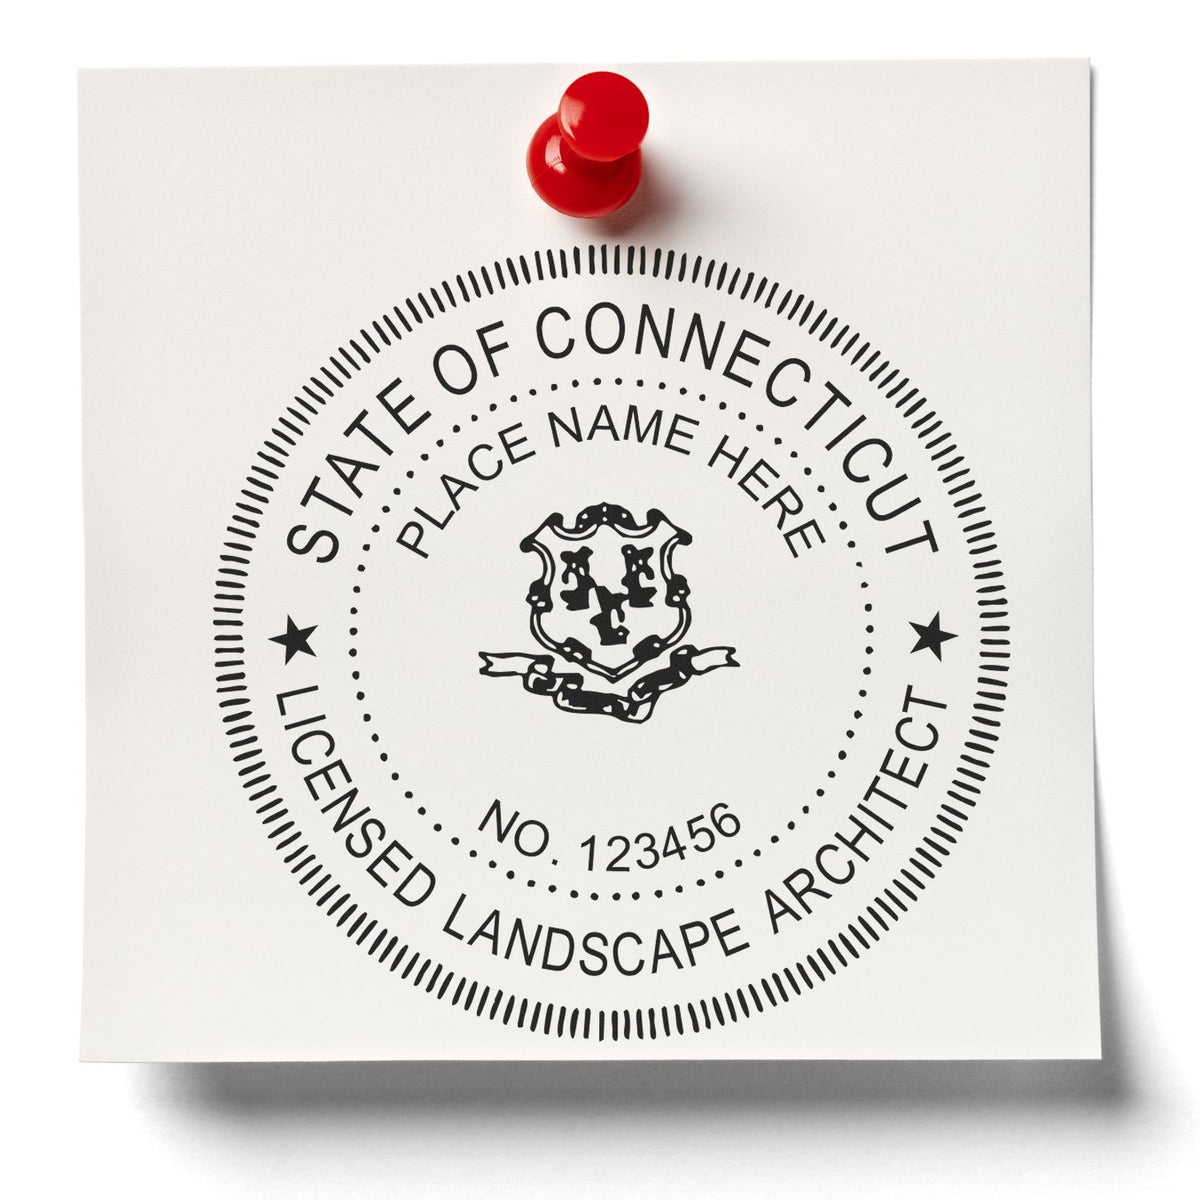 This paper is stamped with a sample imprint of the Slim Pre-Inked Connecticut Landscape Architect Seal Stamp, signifying its quality and reliability.